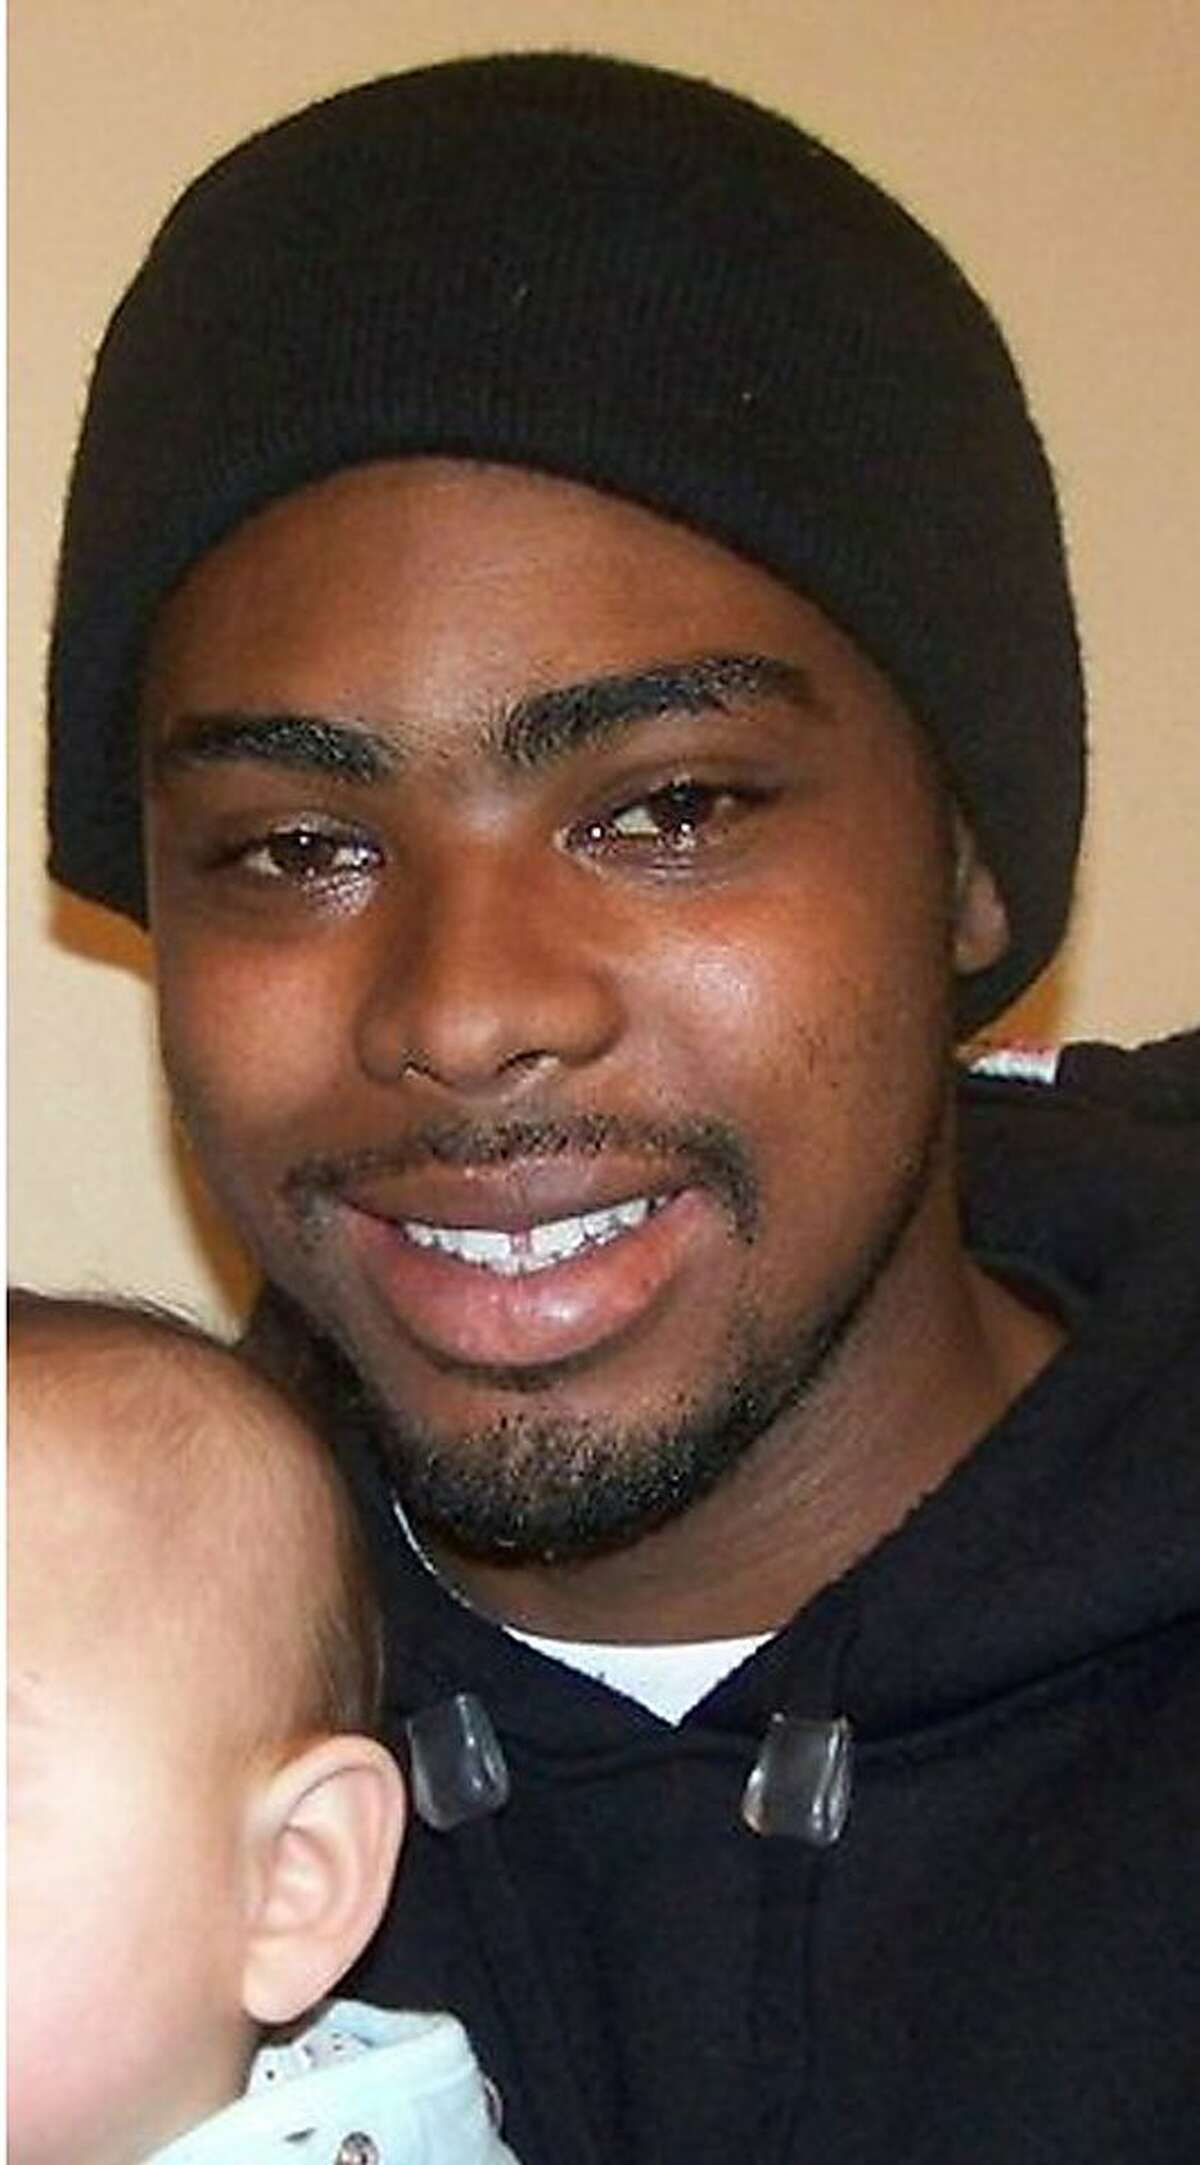 FILE - This undated family photo provided by the Law Offices of John Burris shows Oscar Grant, a 22-year-old transit rider who was shot and killed by Bay Area Rapid Transit police on New Year's Day 2009.